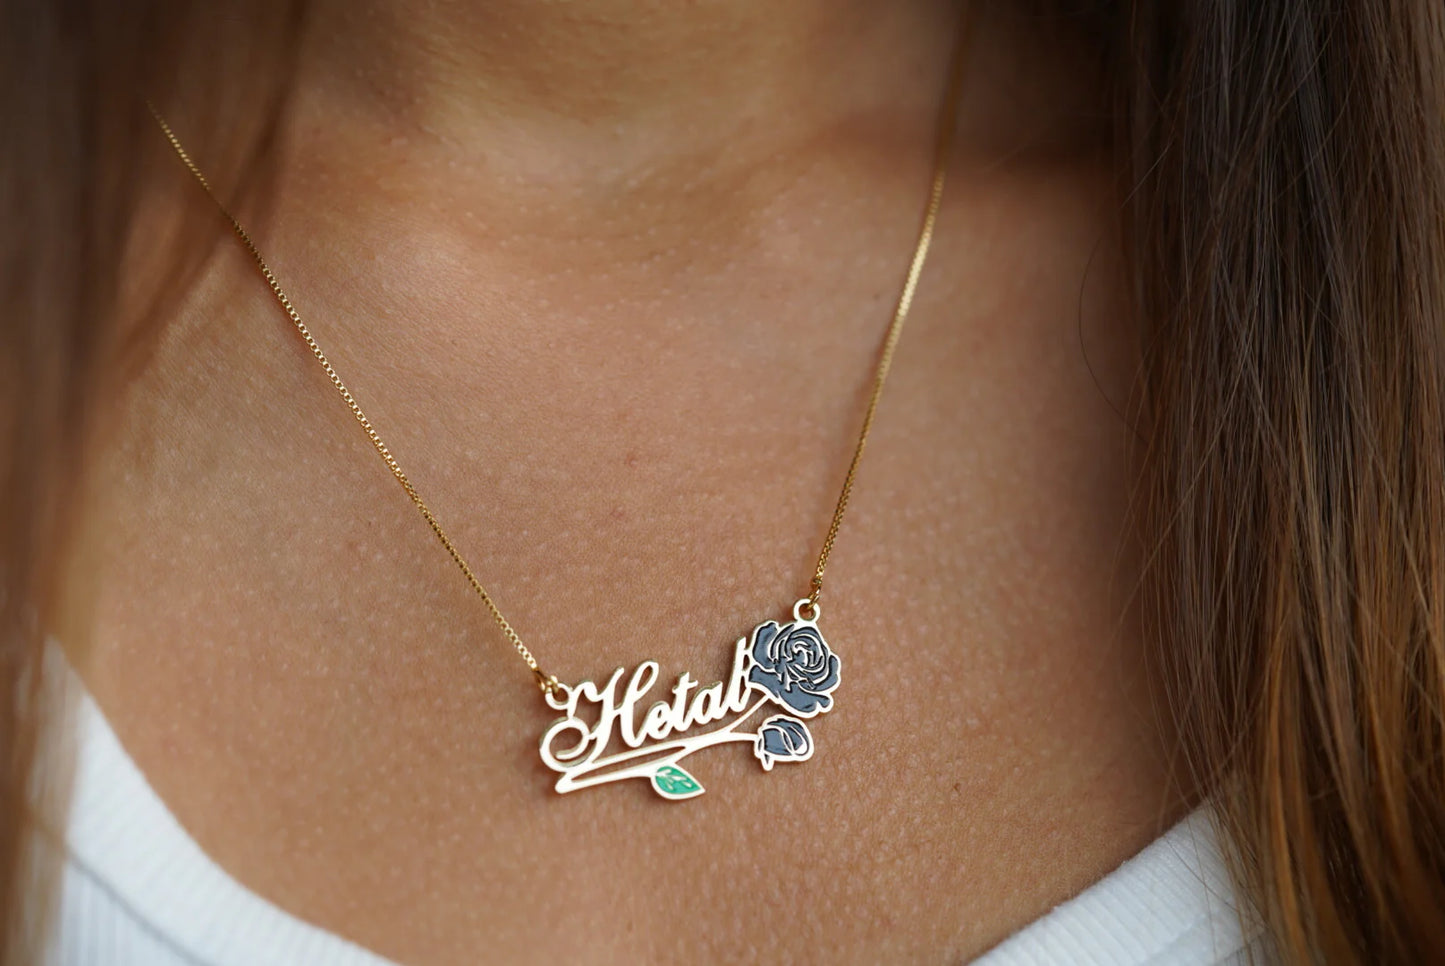 Enamel name necklace with Rose